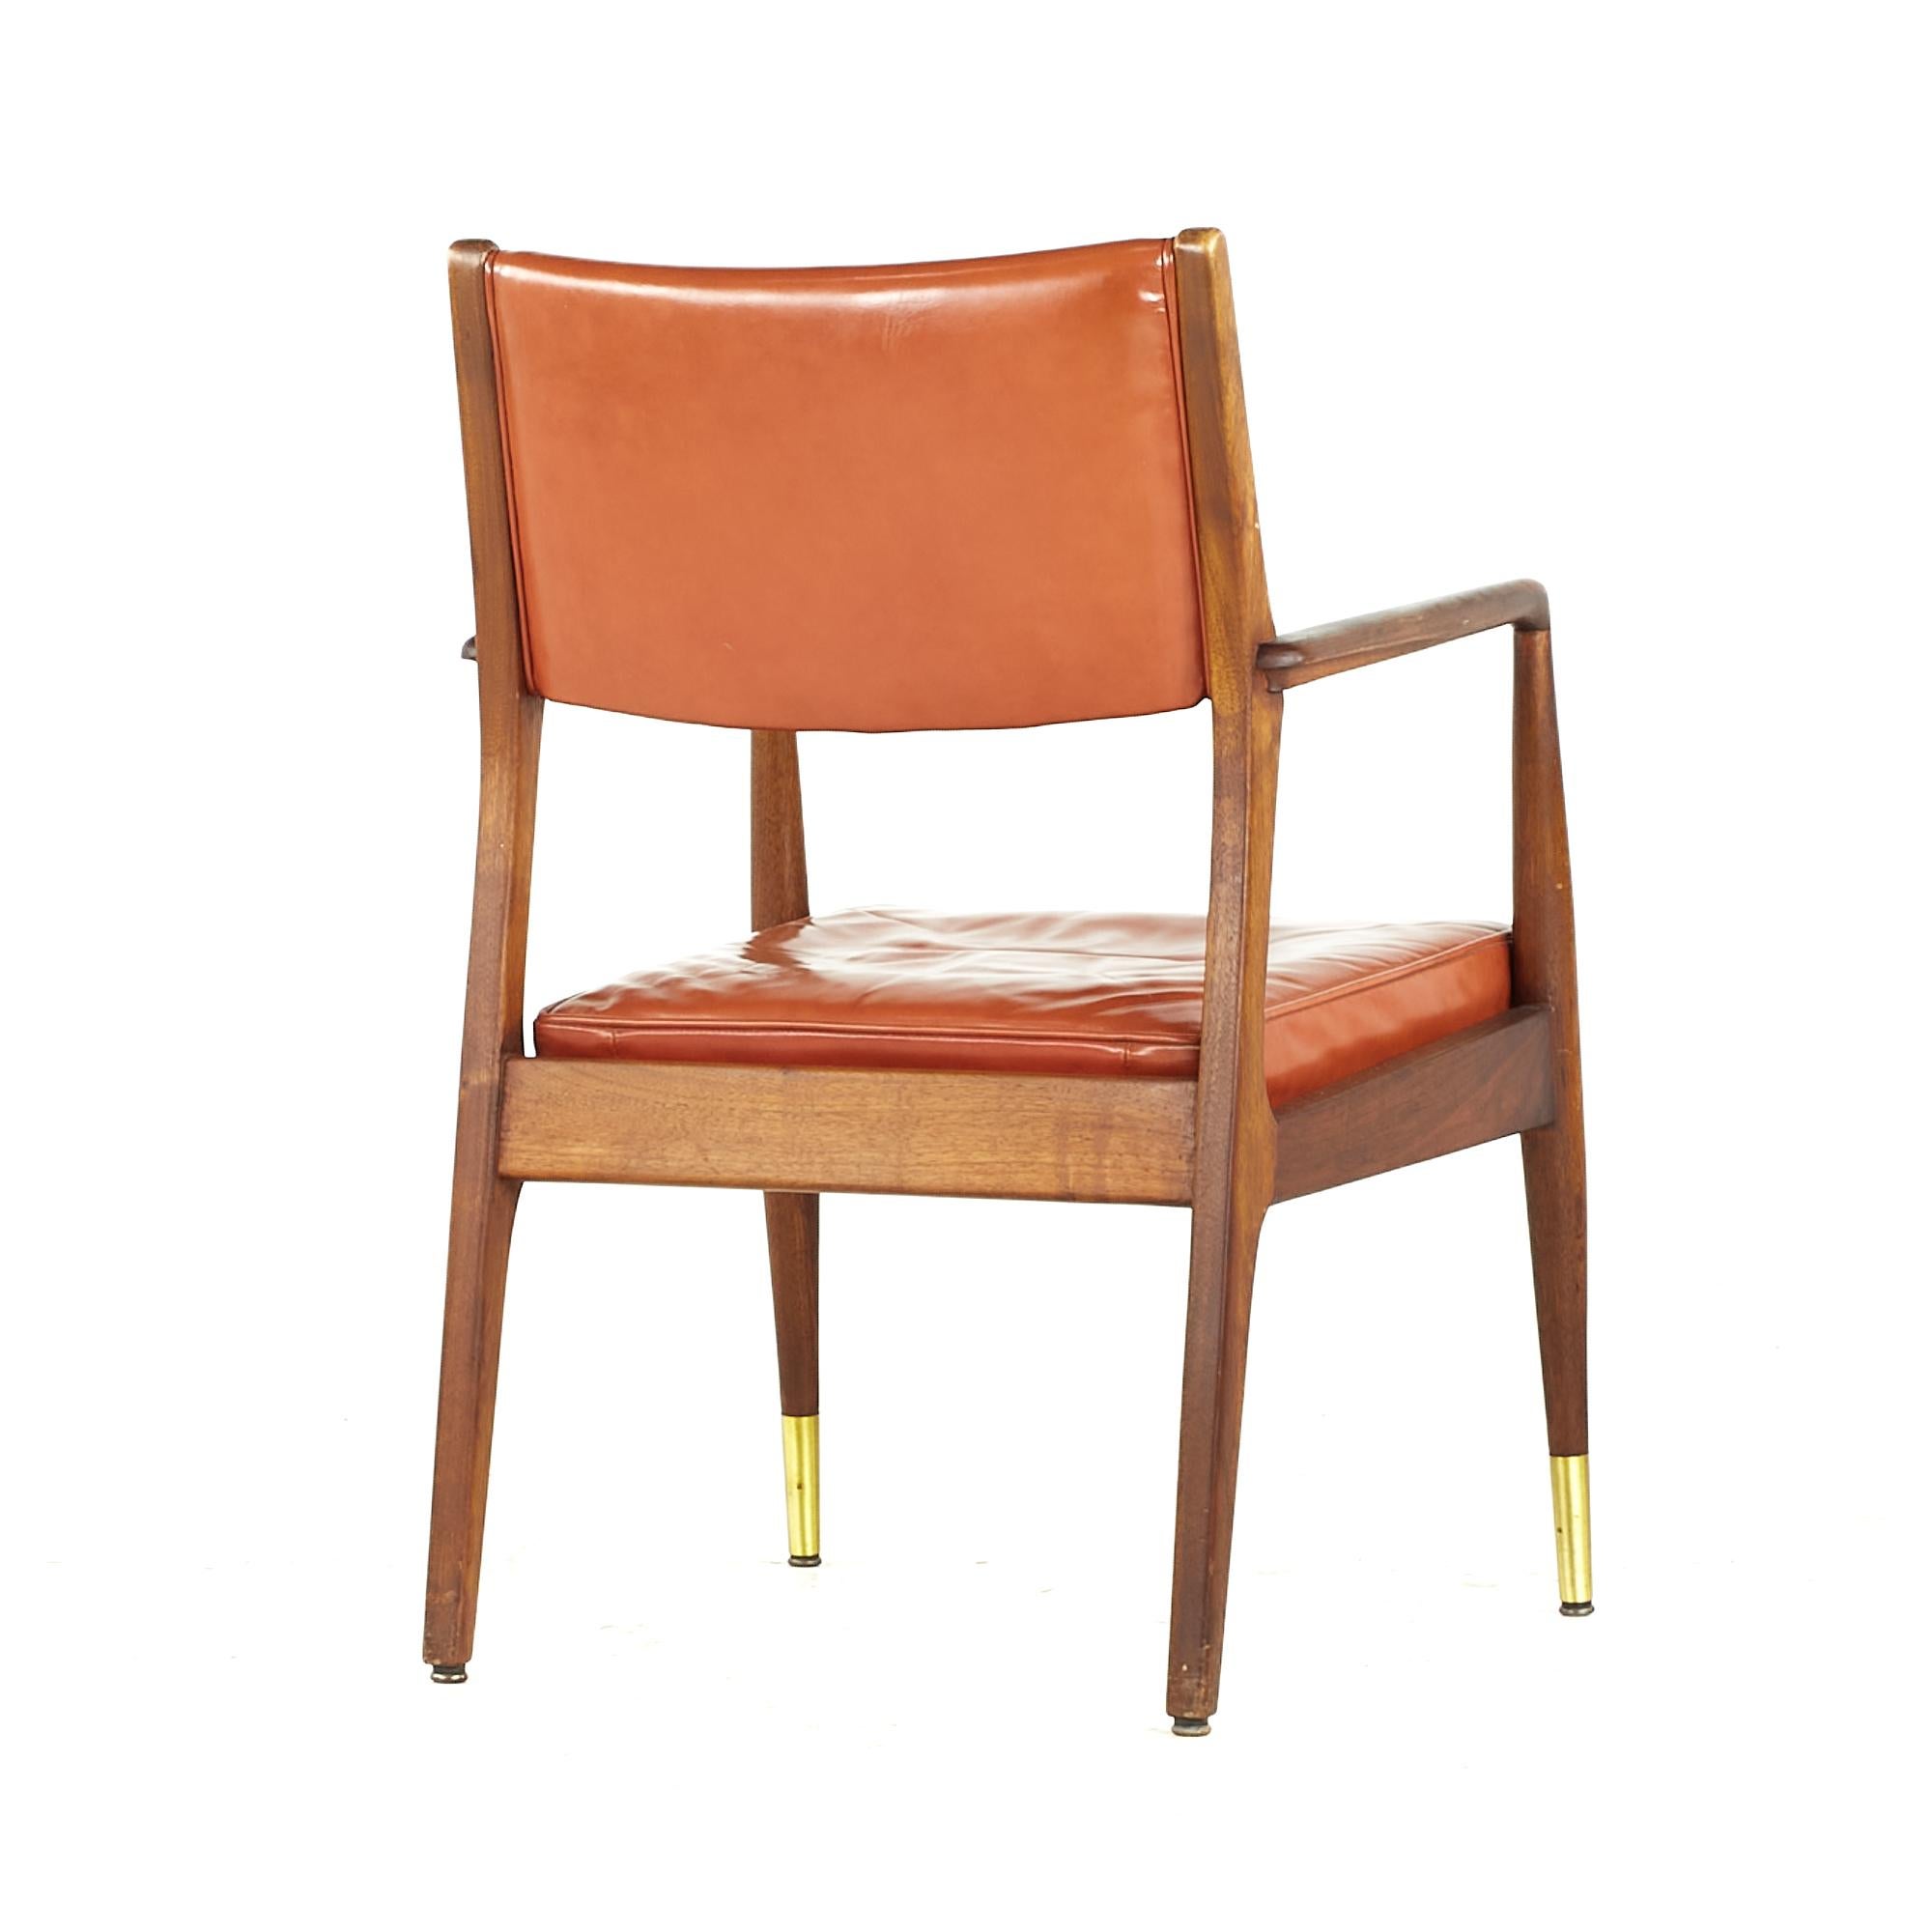 American Stow Davis Midcentury Walnut and Brass Lounge Chair For Sale